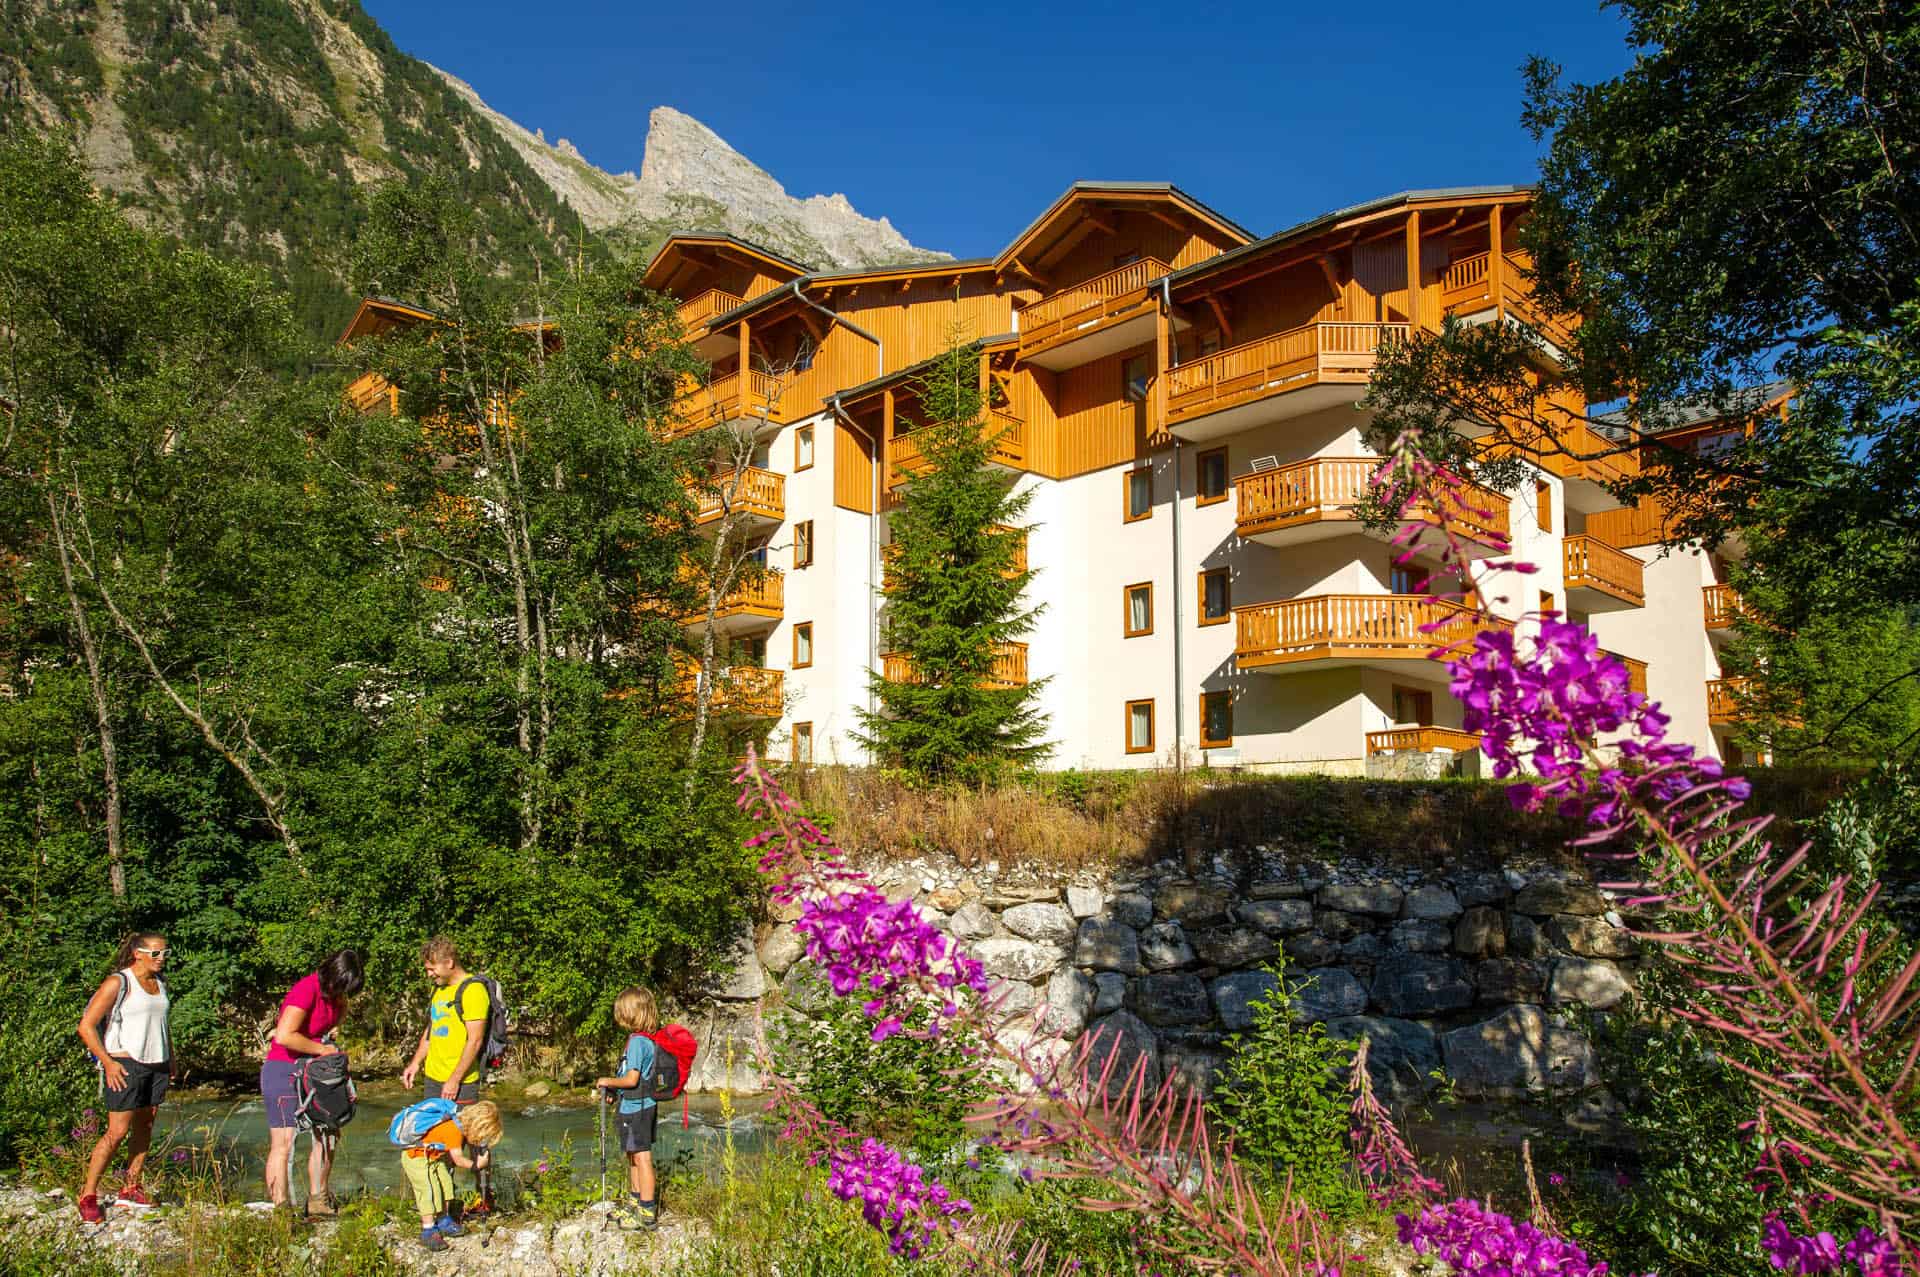 Exterior view of the Le Blanchot holiday residence in Pralognan-la-Vanoise, in the Northern Alps